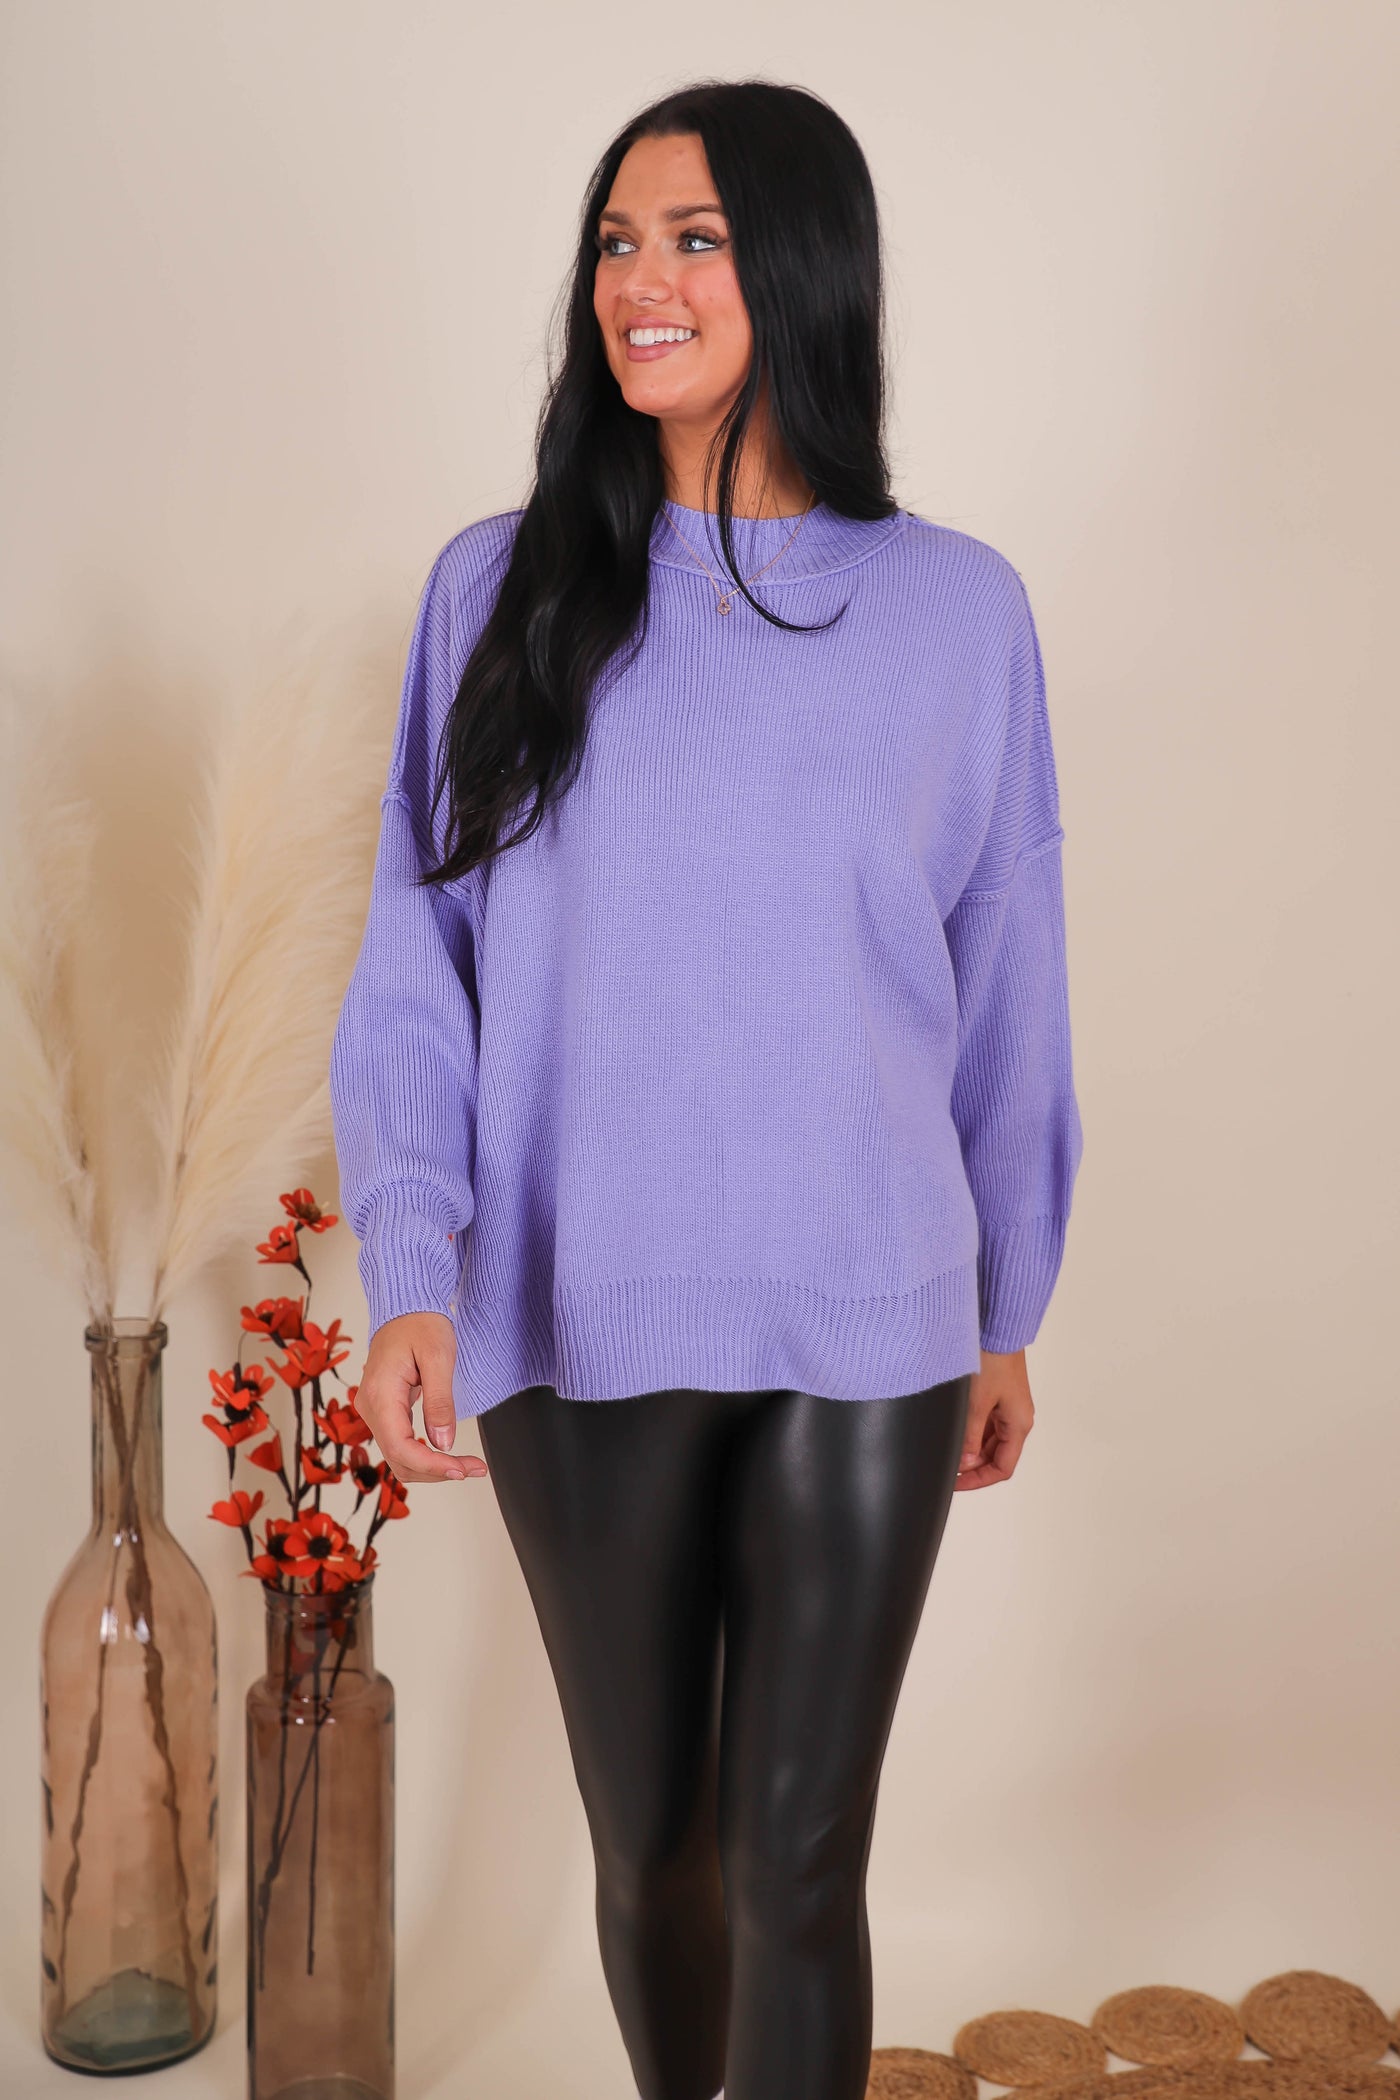 Women's Oversized Sweater- Violet Sweater- Sweater For Leggings- Free People Sweater Dupe